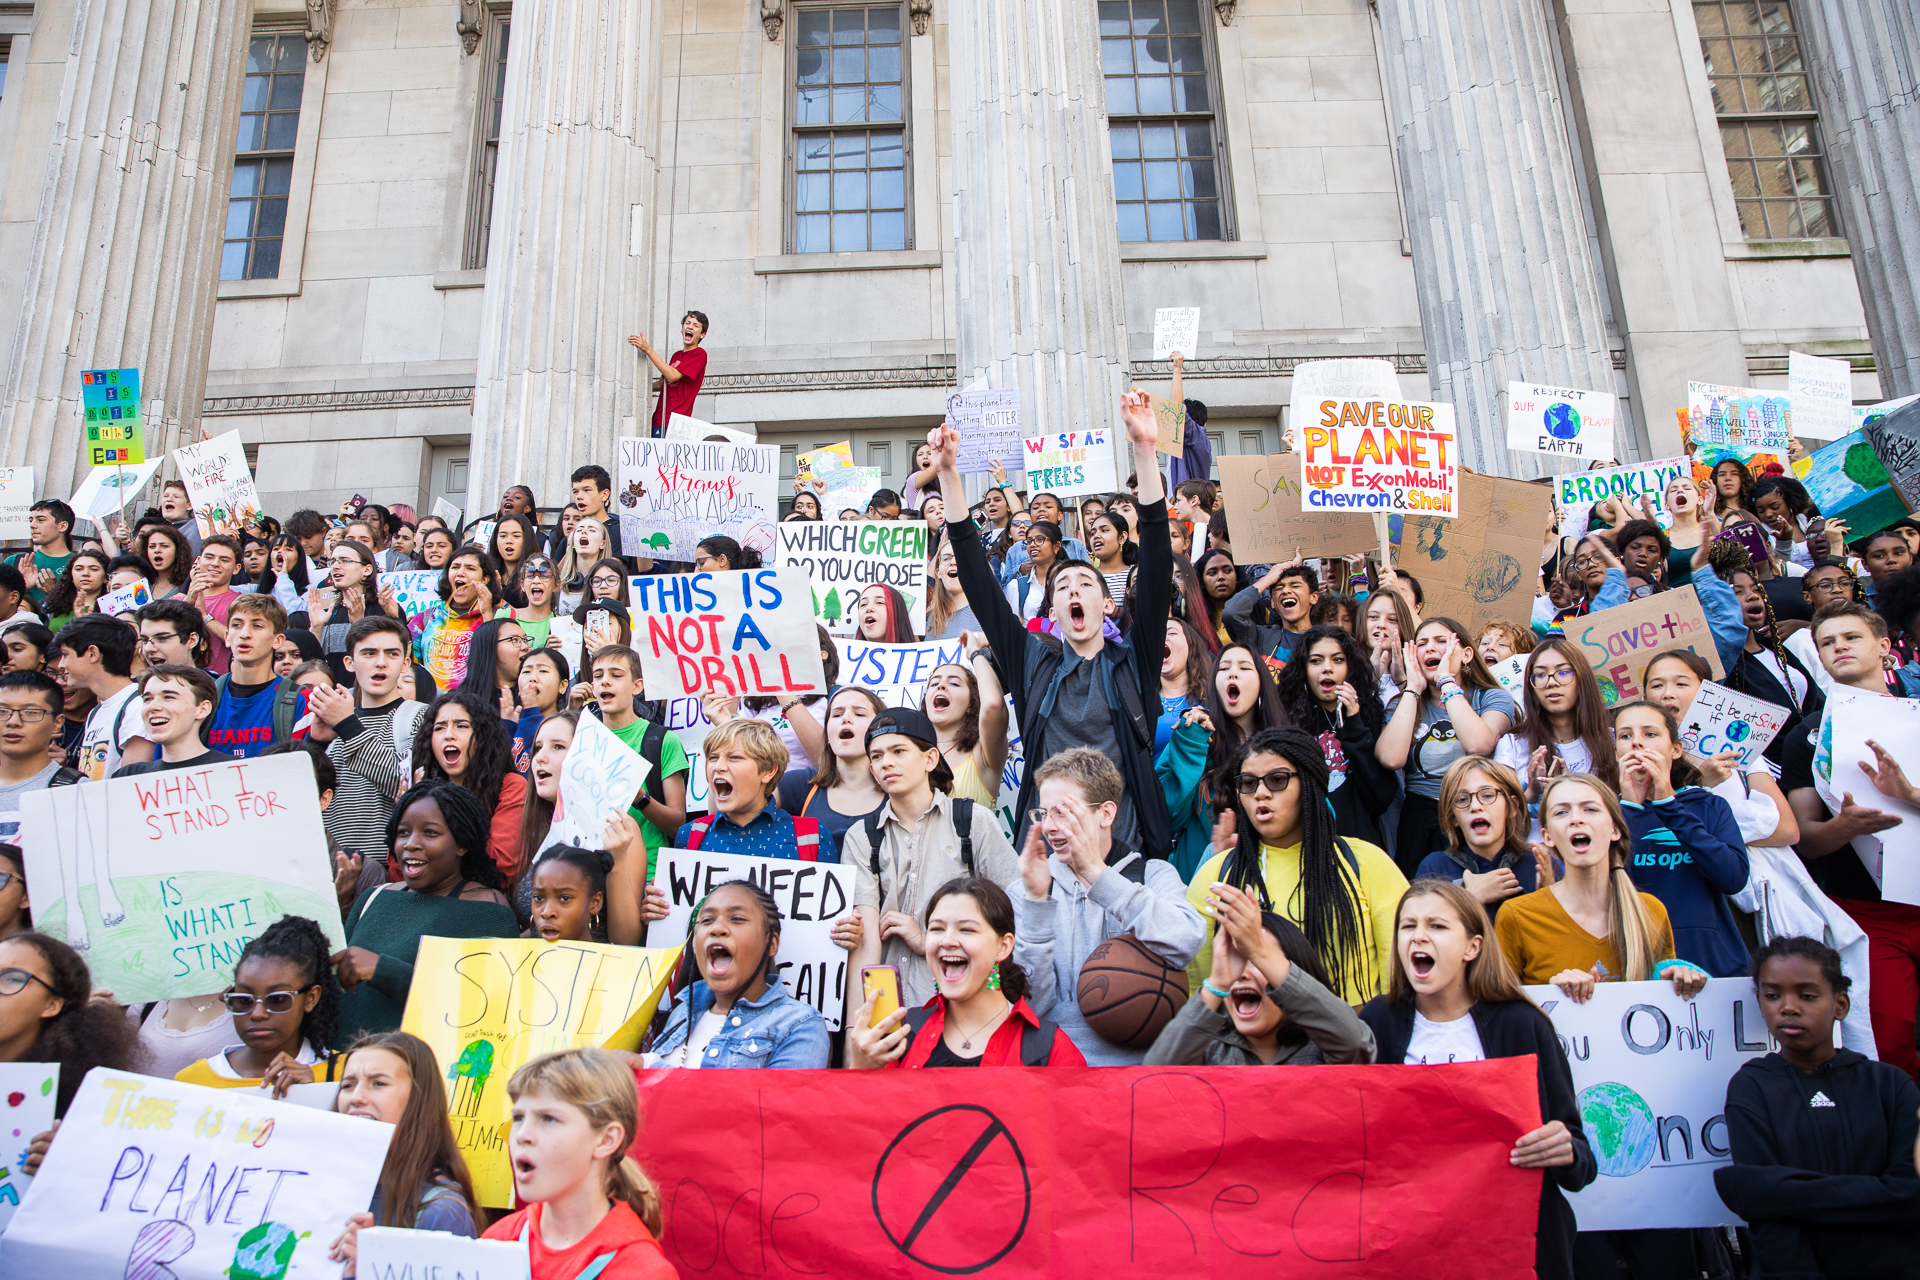 Hundreds of Brooklyn students protested on the steps of Borough Hall to demand global government take action against climate change.